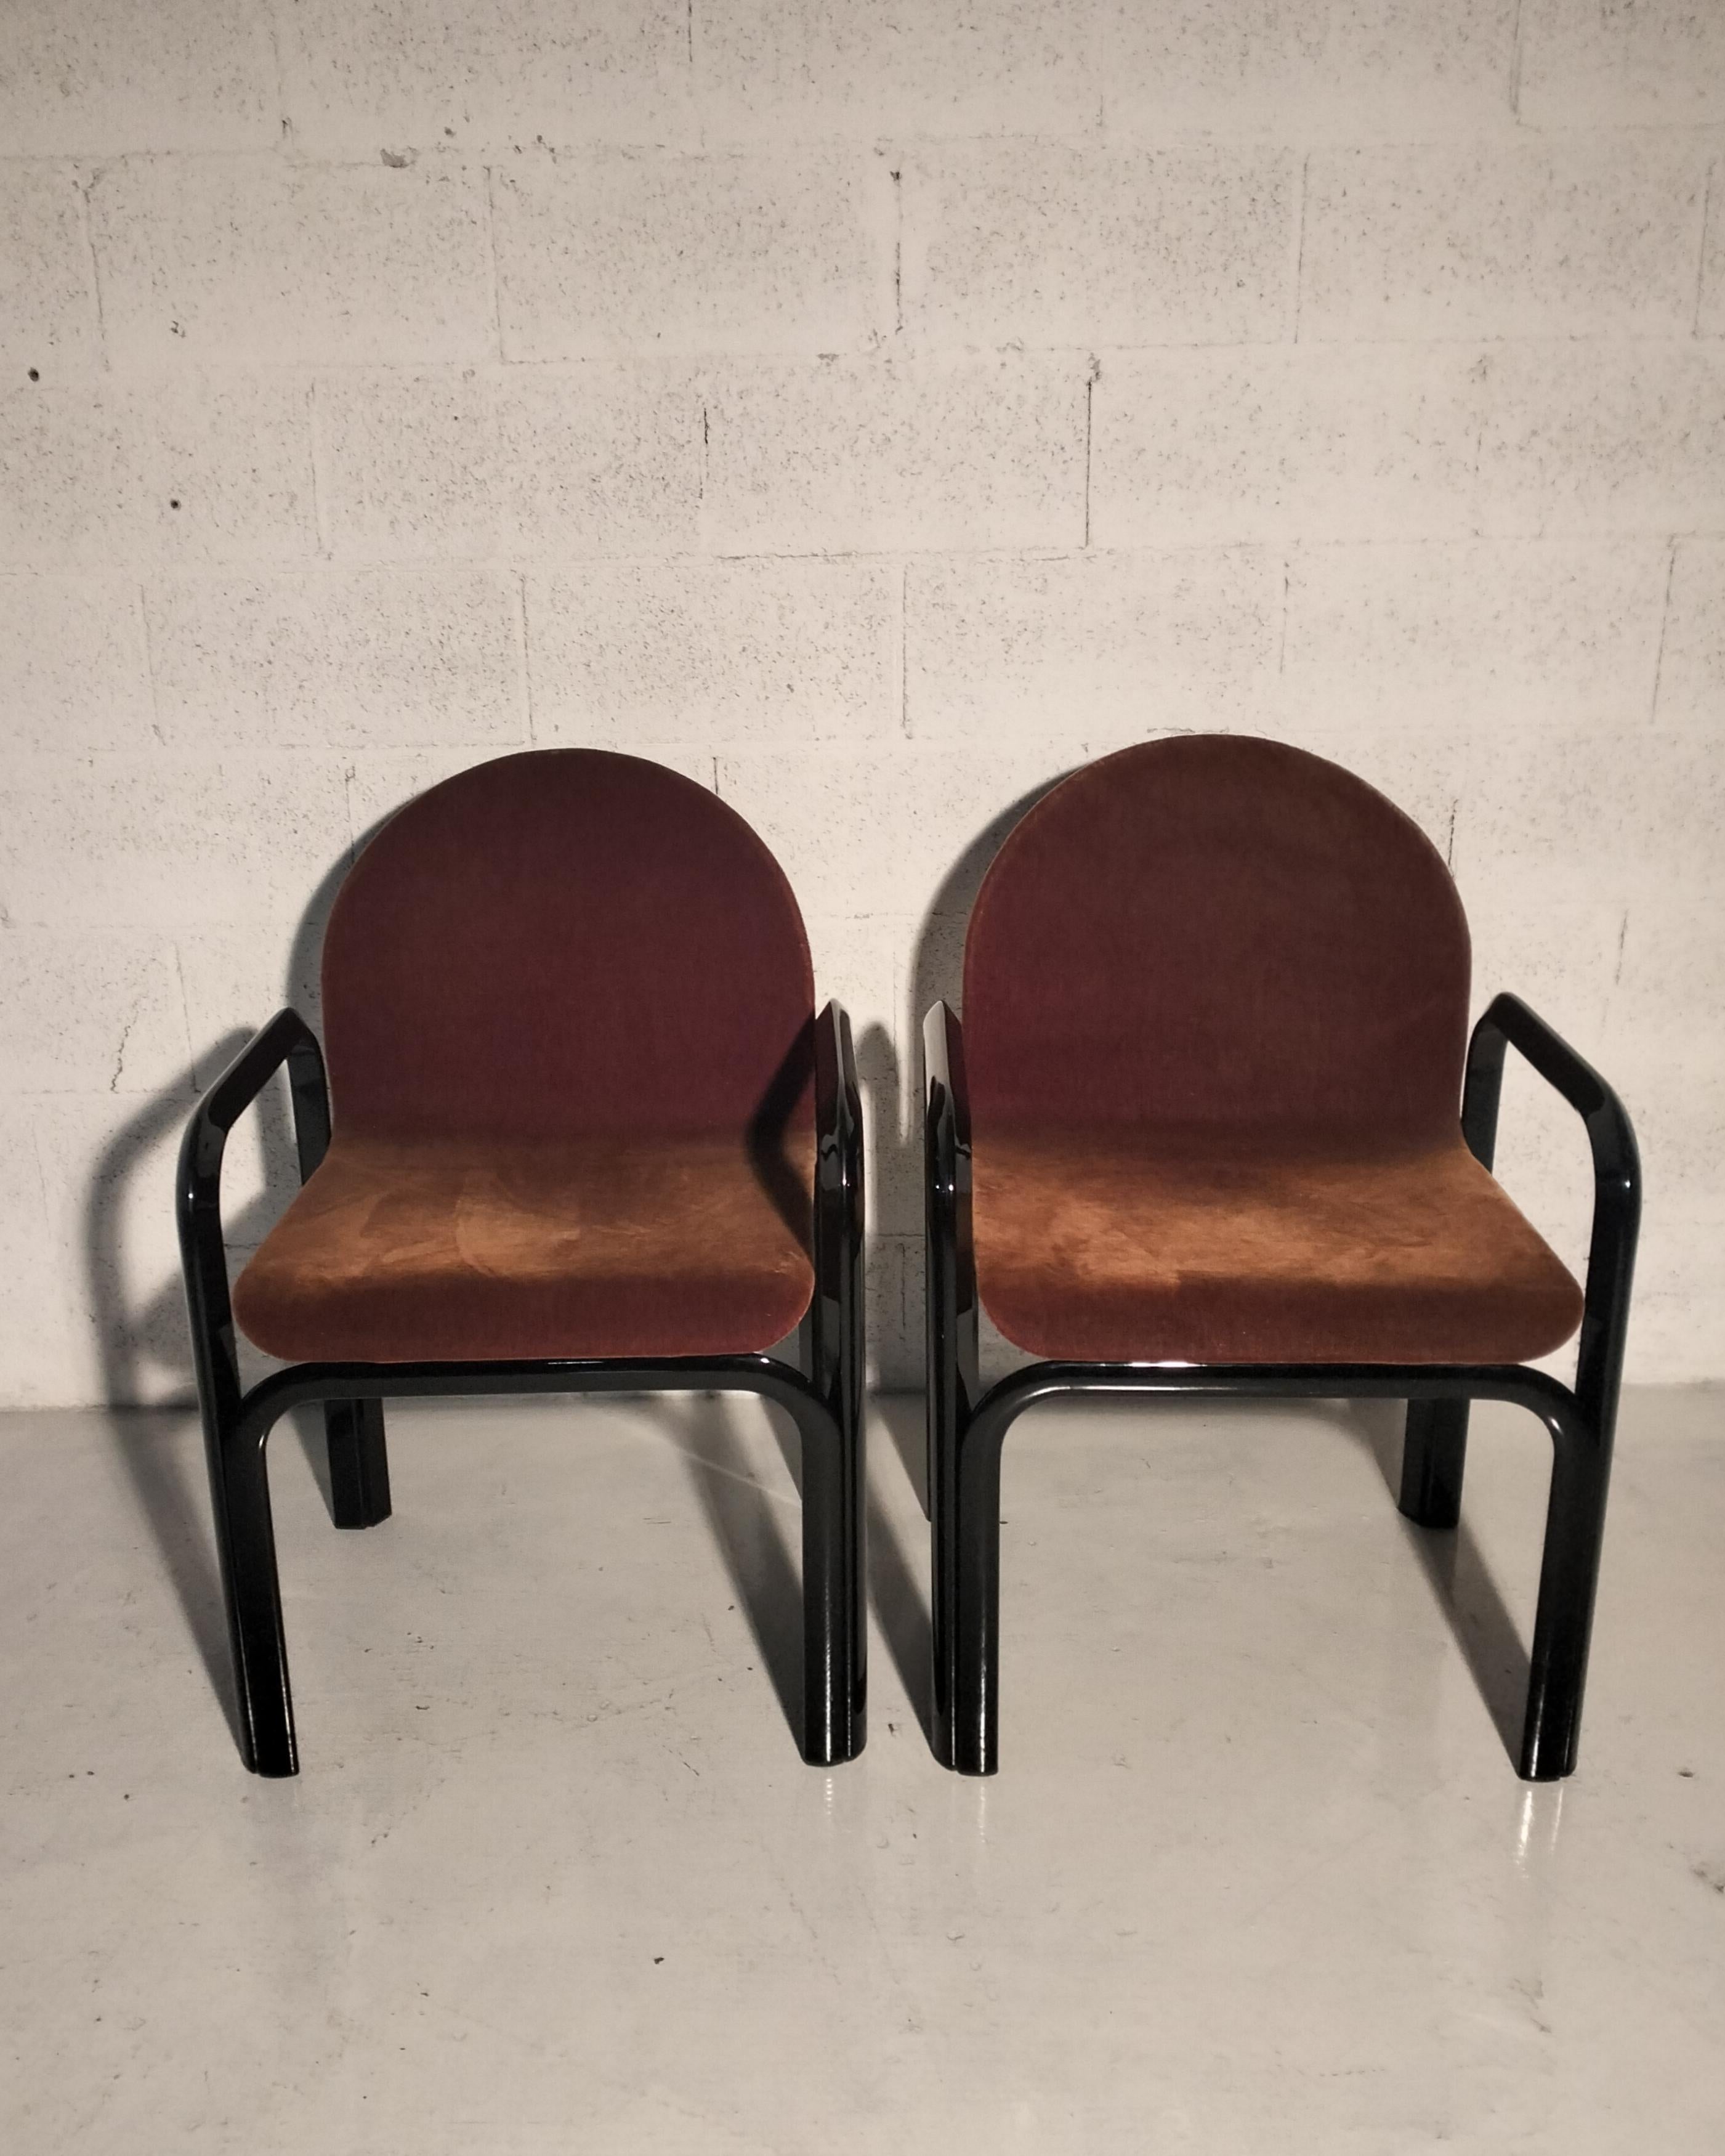 Set of 4 chairs and 1 square table Orsay mod. by Gae Aulenti for Knoll 80s For Sale 3